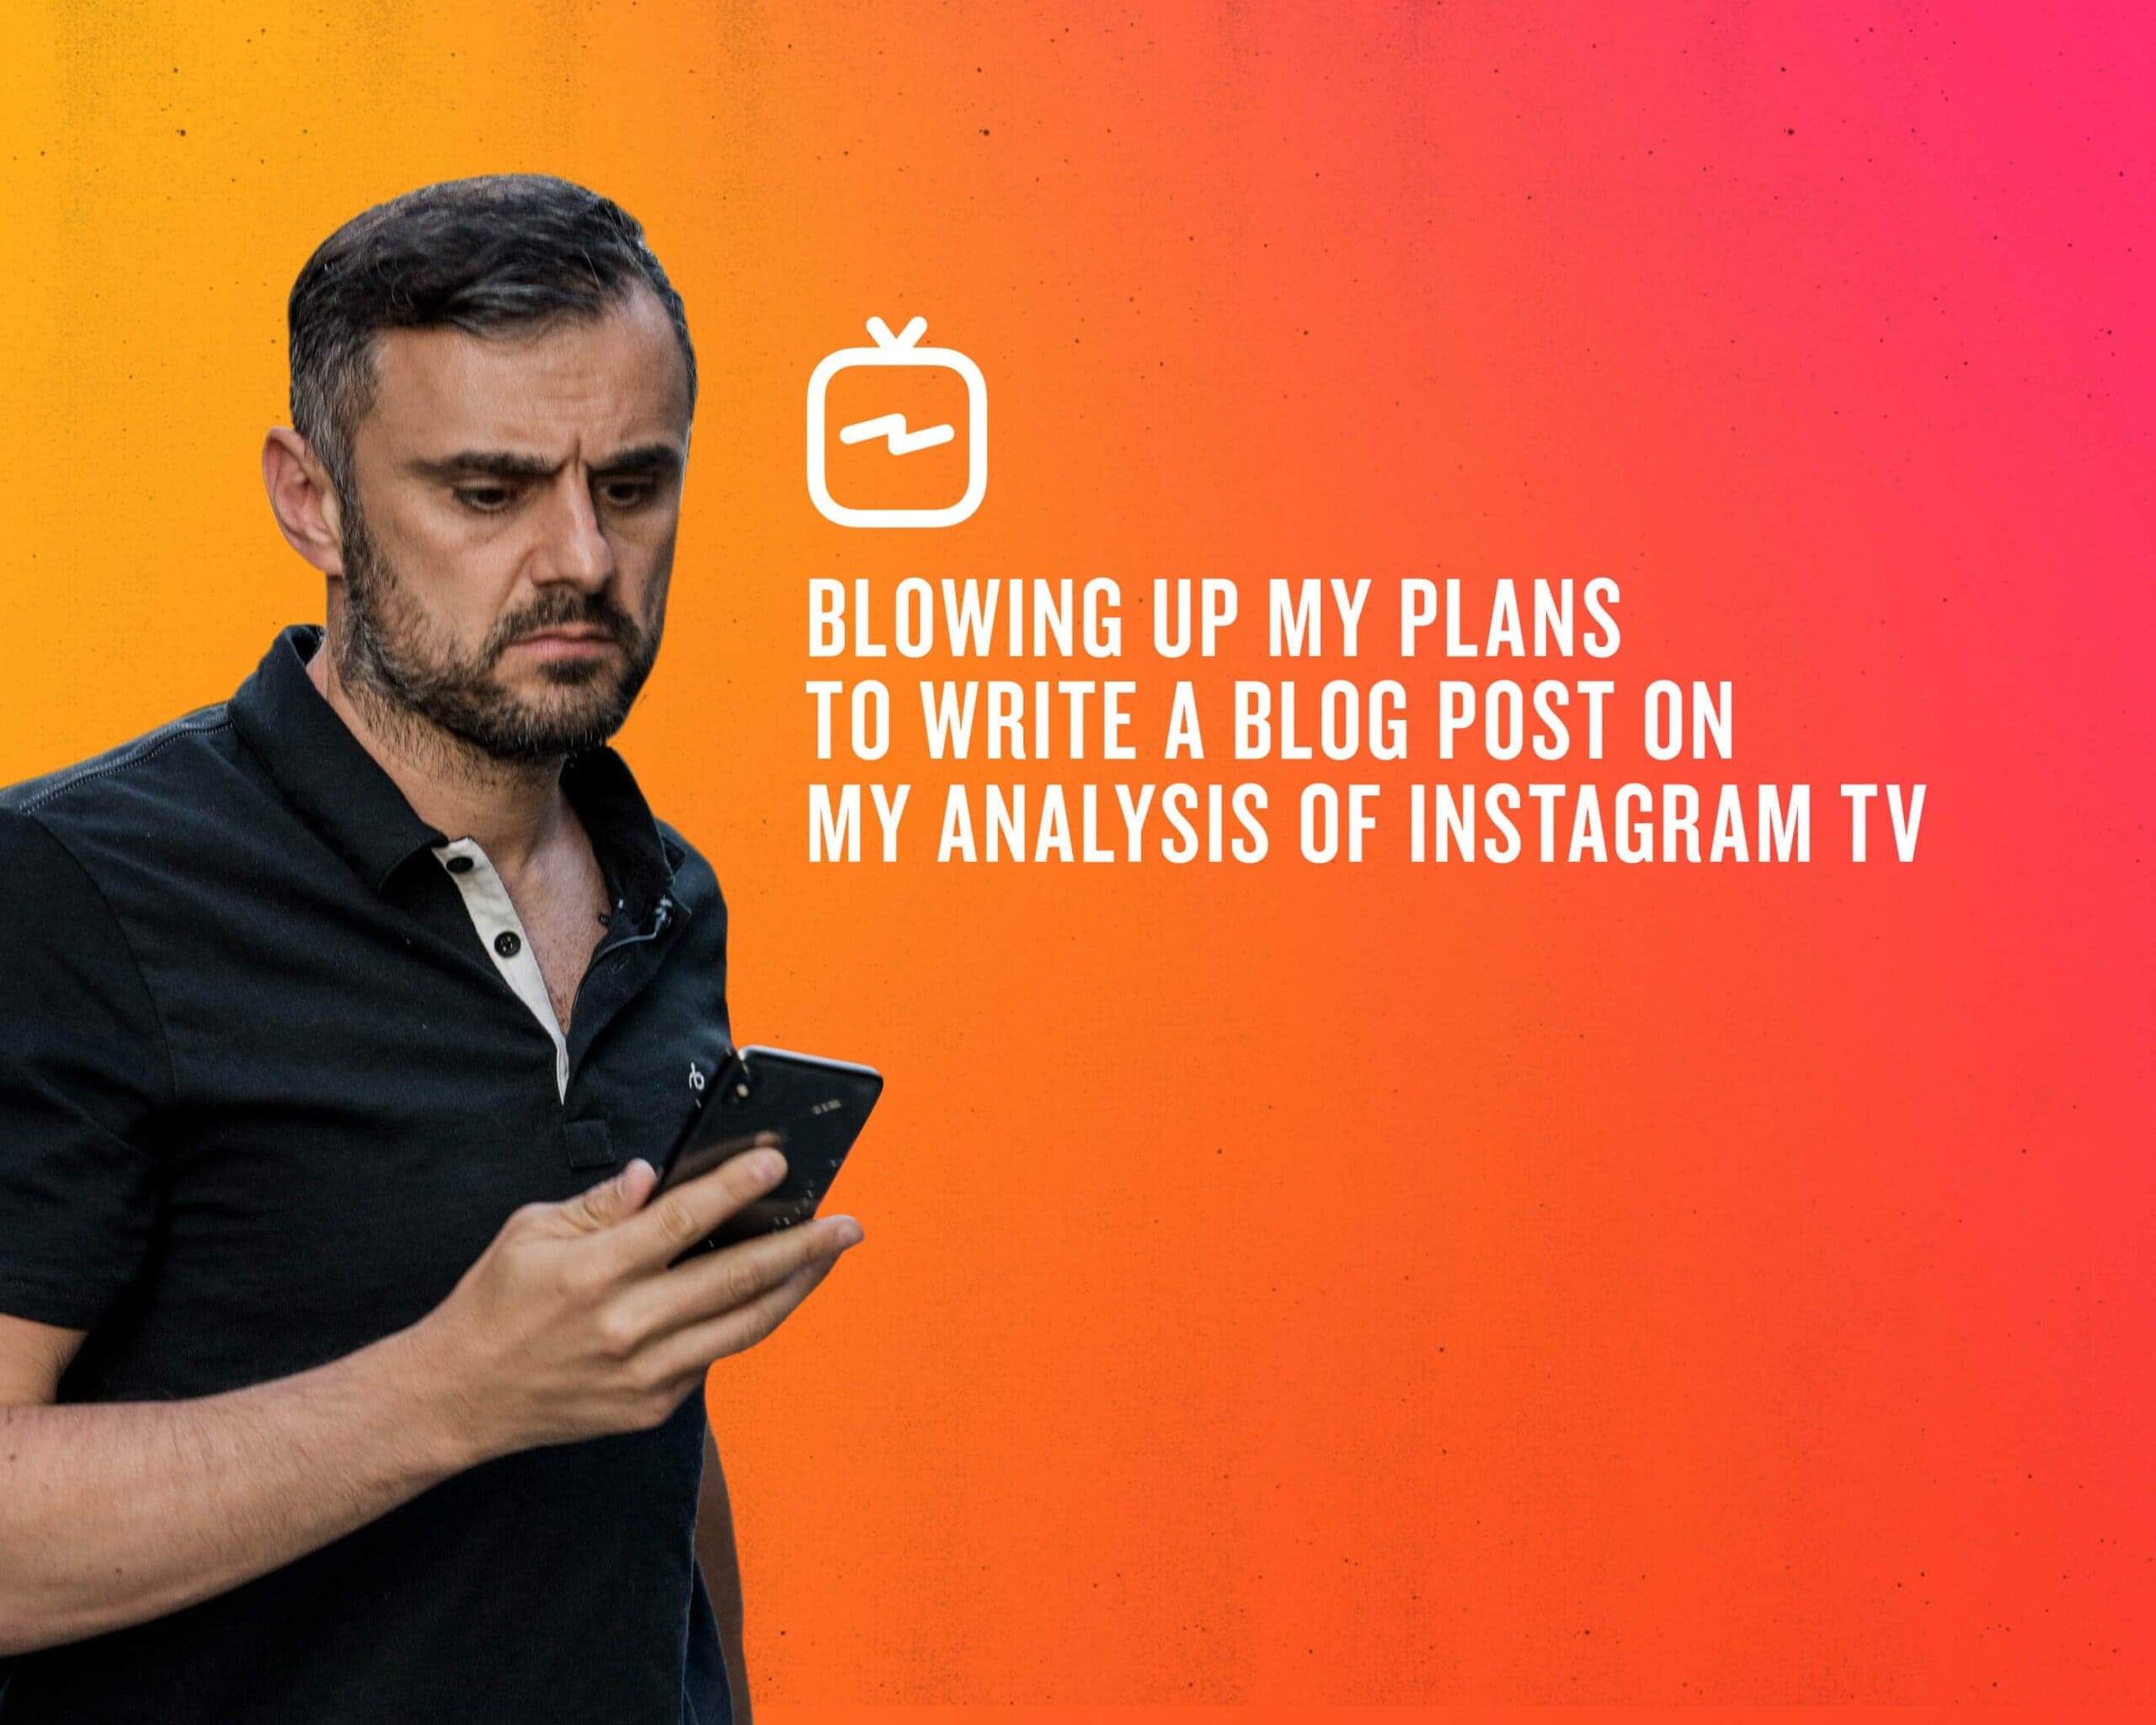 Blowing Up My Plans to Write a Blog Post on My Analysis of Instagram TV